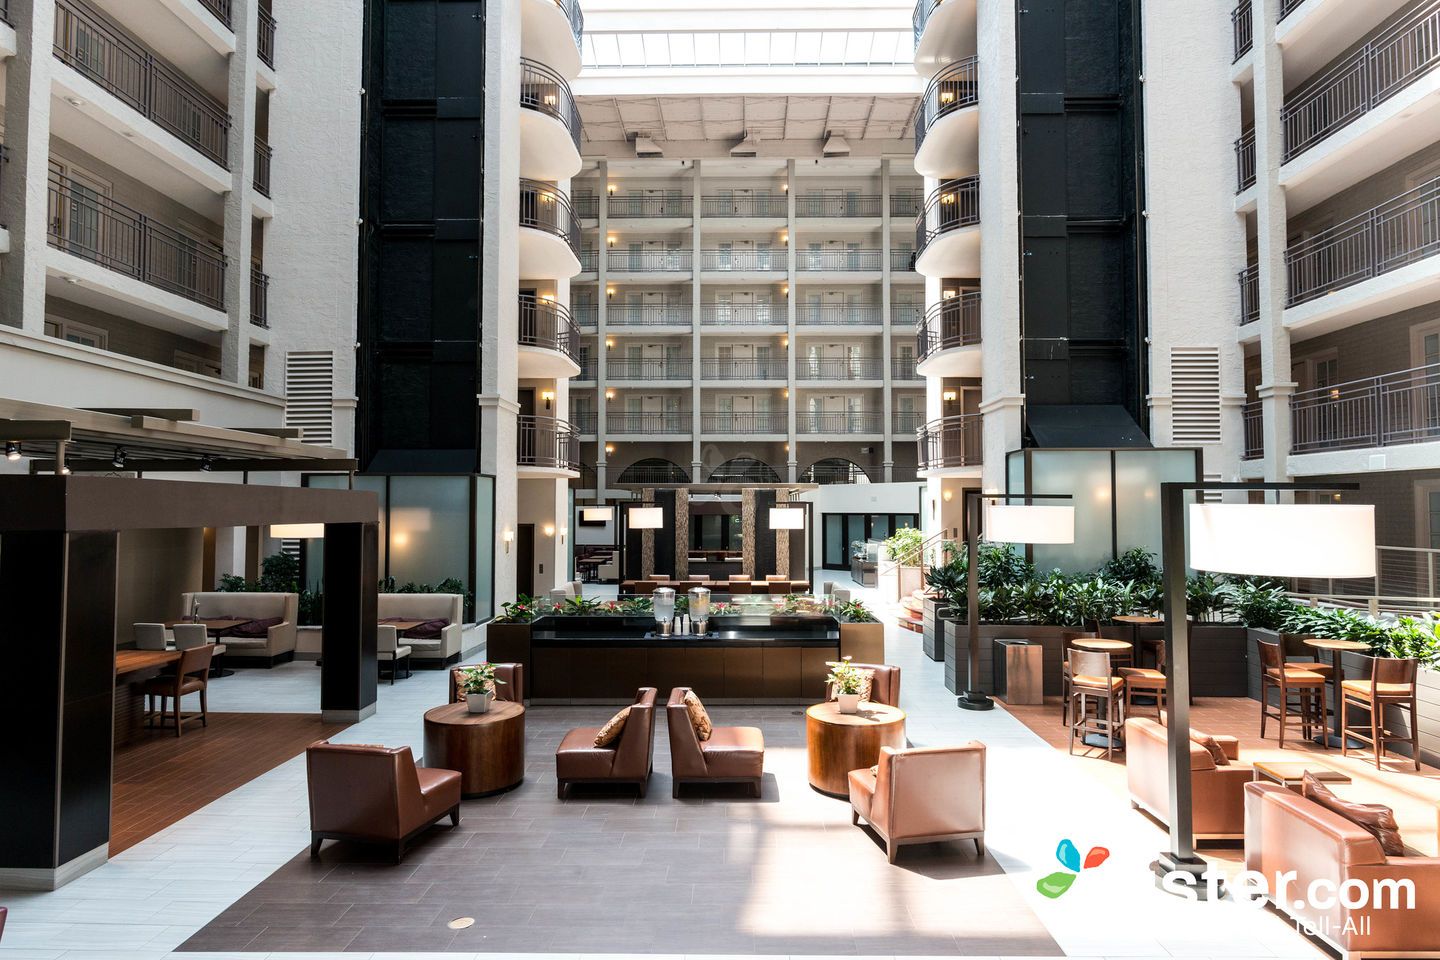 Embassy Suites By Hilton Denver Tech Center North Review What To Really Expect If You Stay